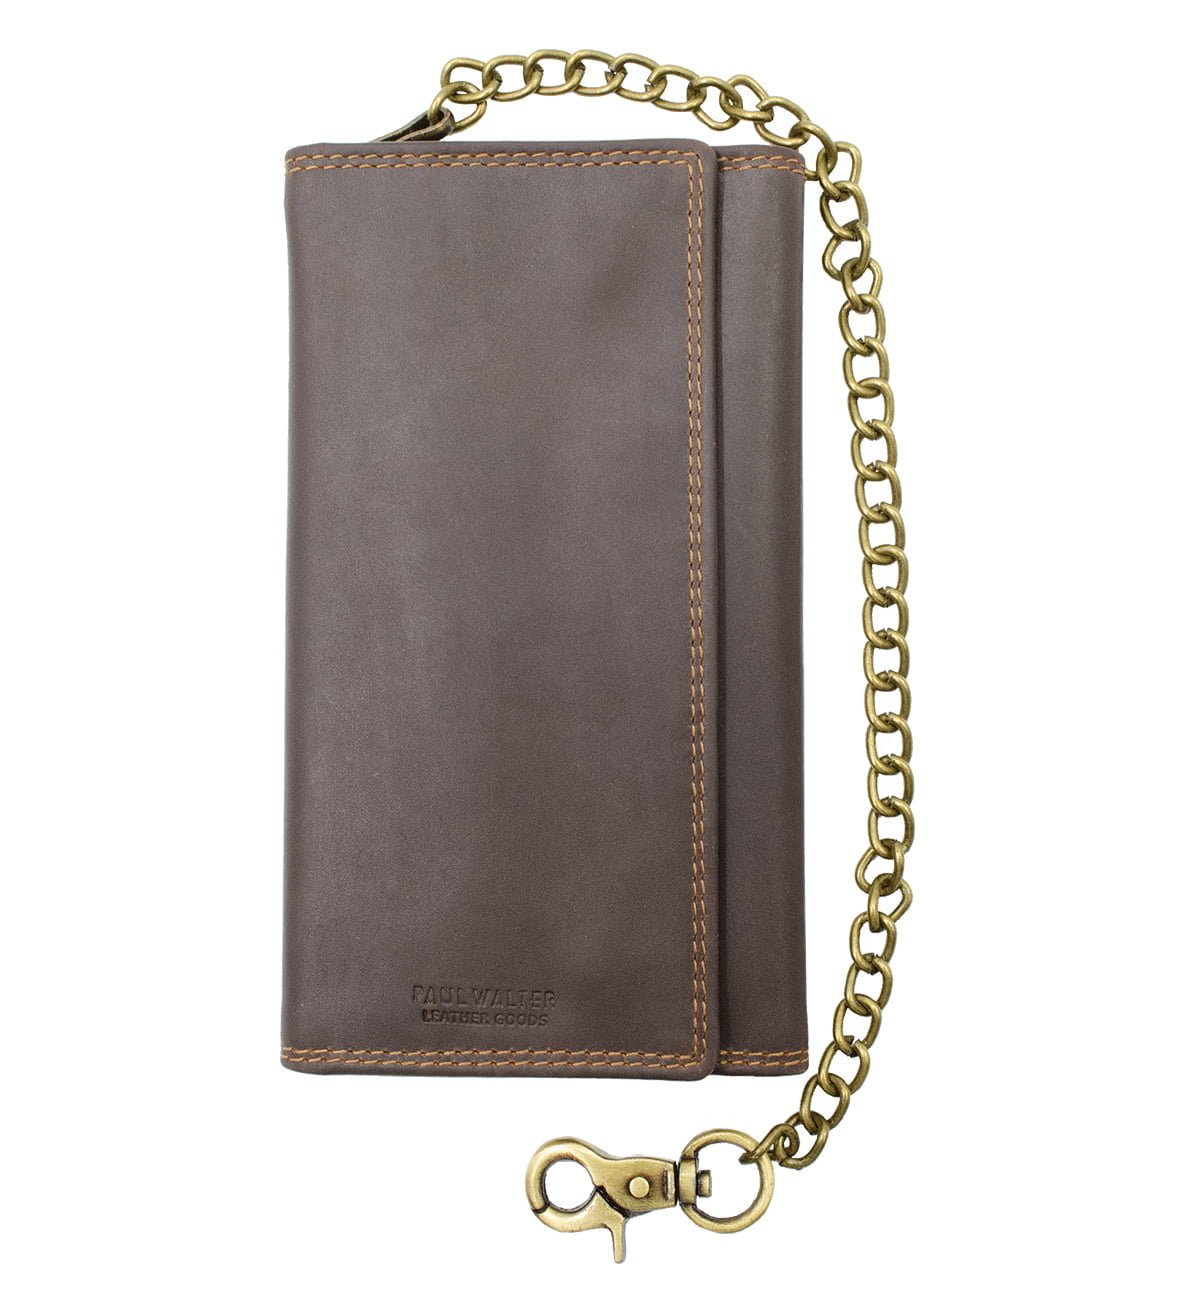 Hunter Biker Long Chain Wallet Genuine Leather with RFID Blocking - #BW-408H RF